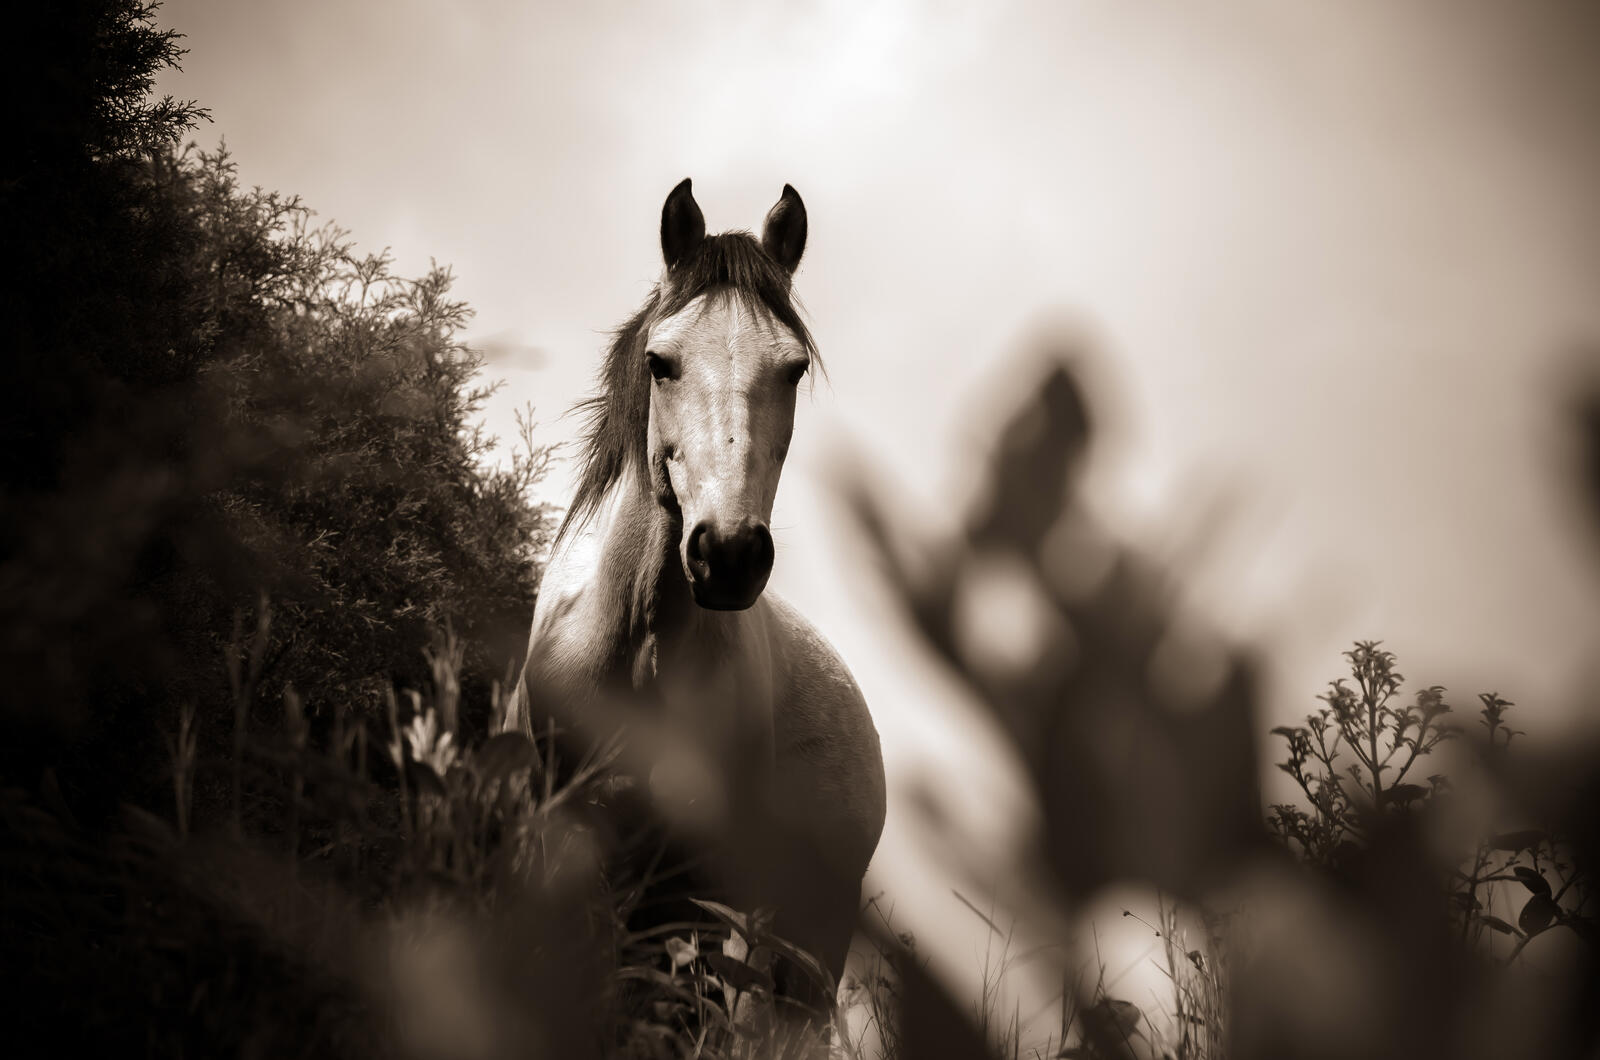 Wallpapers horse monochrome black and white on the desktop